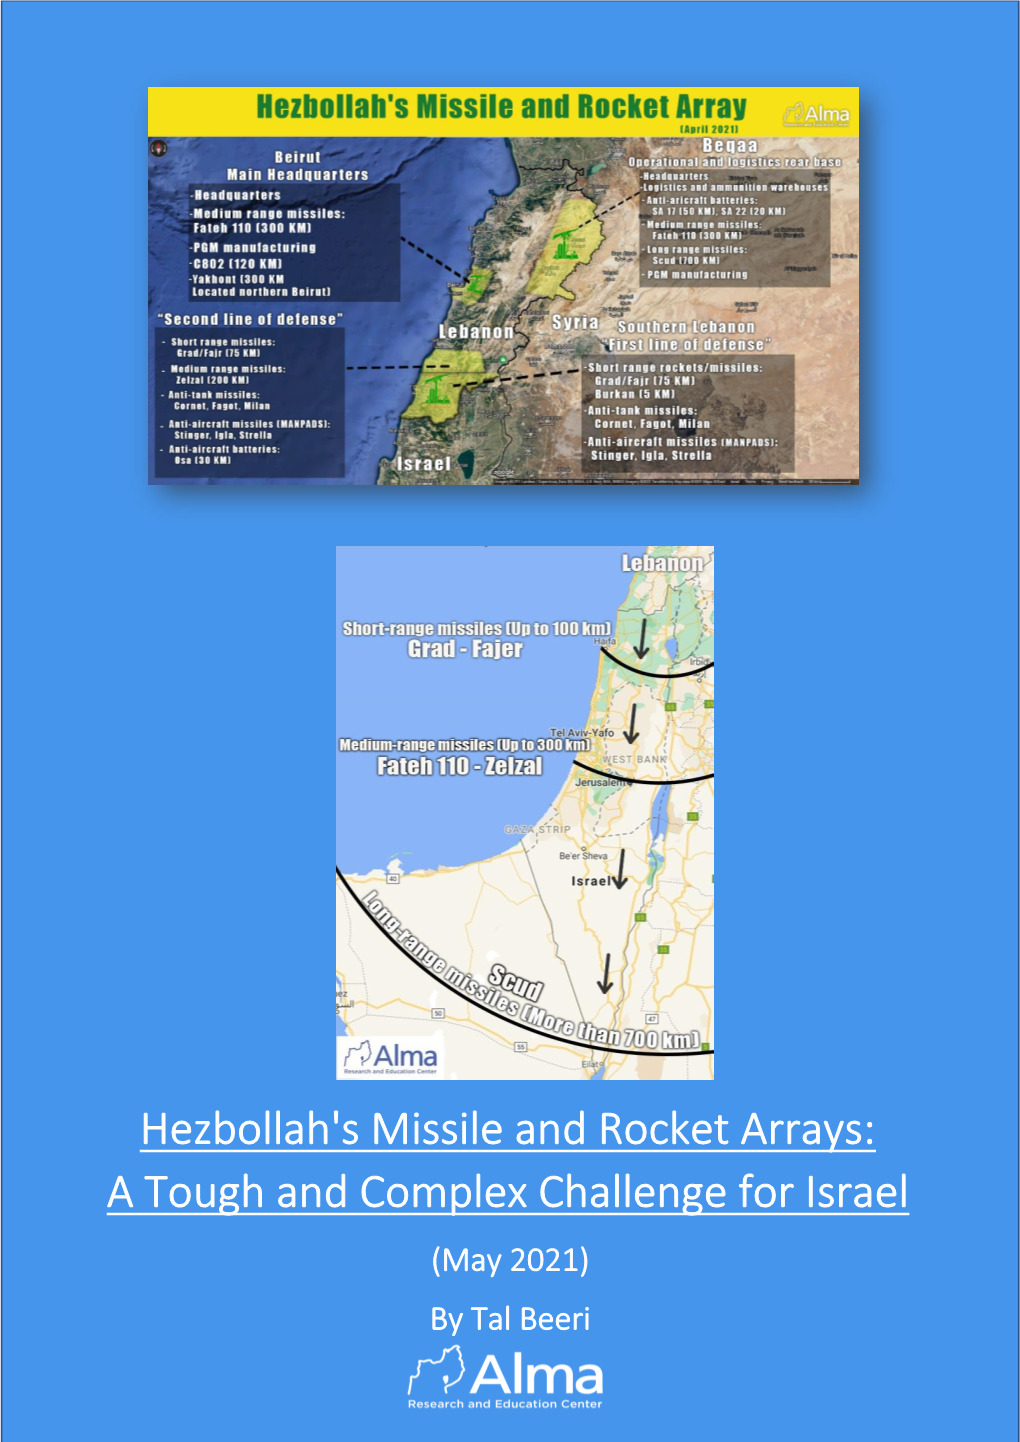 Hezbollah's Missile and Rocket Arrays: a Tough and Complex Challenge for Israel